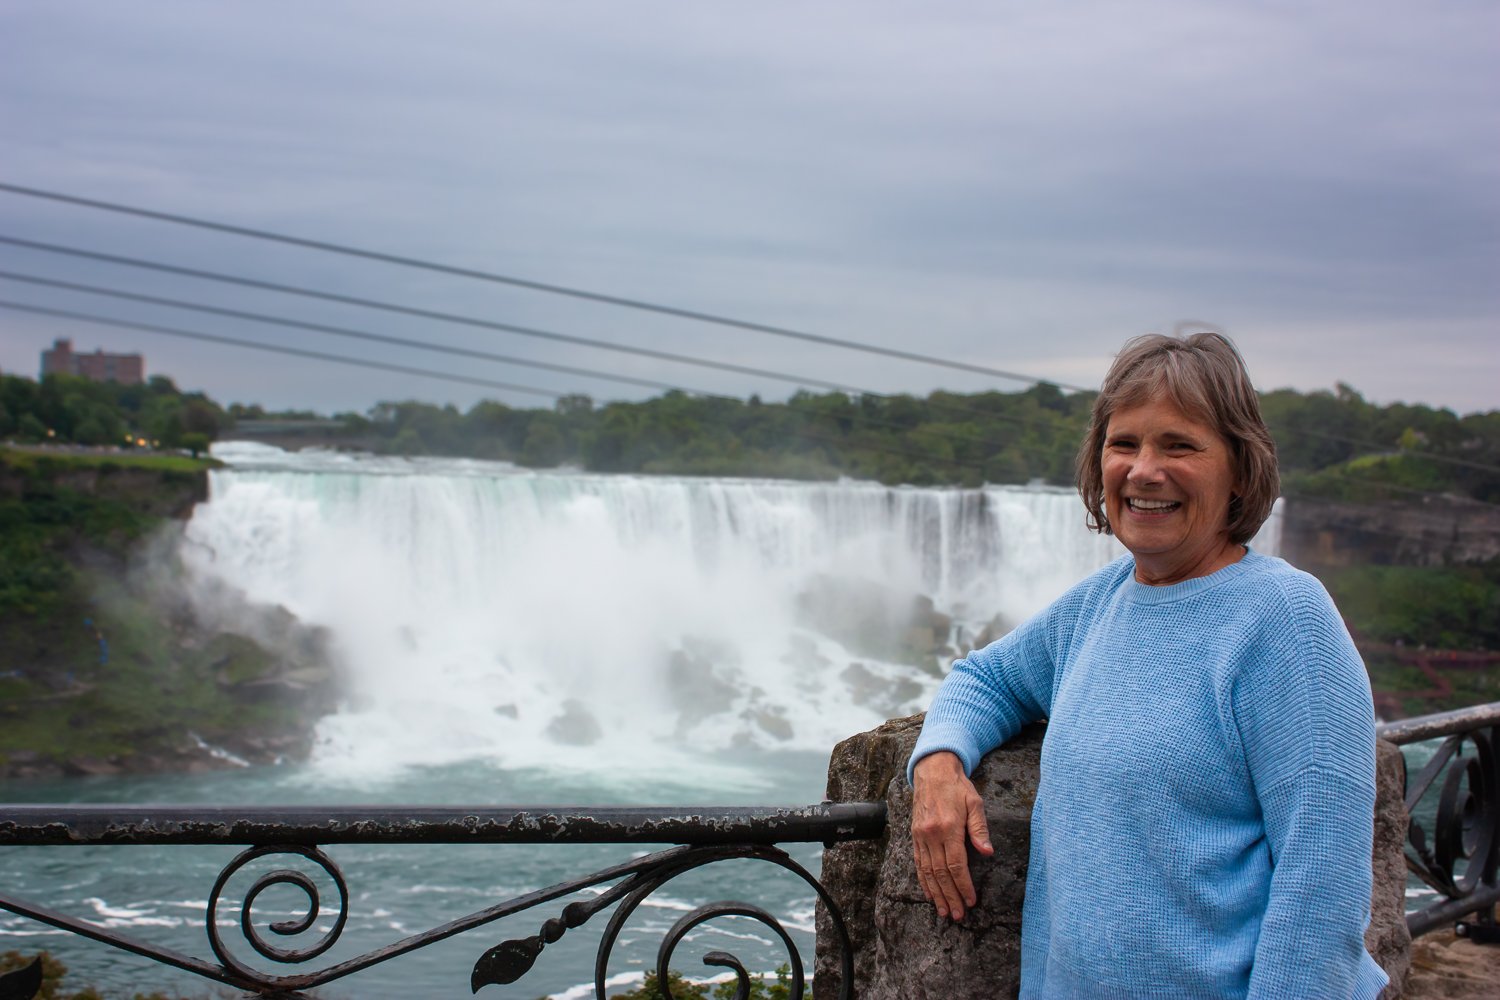 Laura_Suprenant_Photography_Niagara_Falls_Person_with_Disabilities_Travel_Photography_Canada_mother_daughter_adventure.jpg